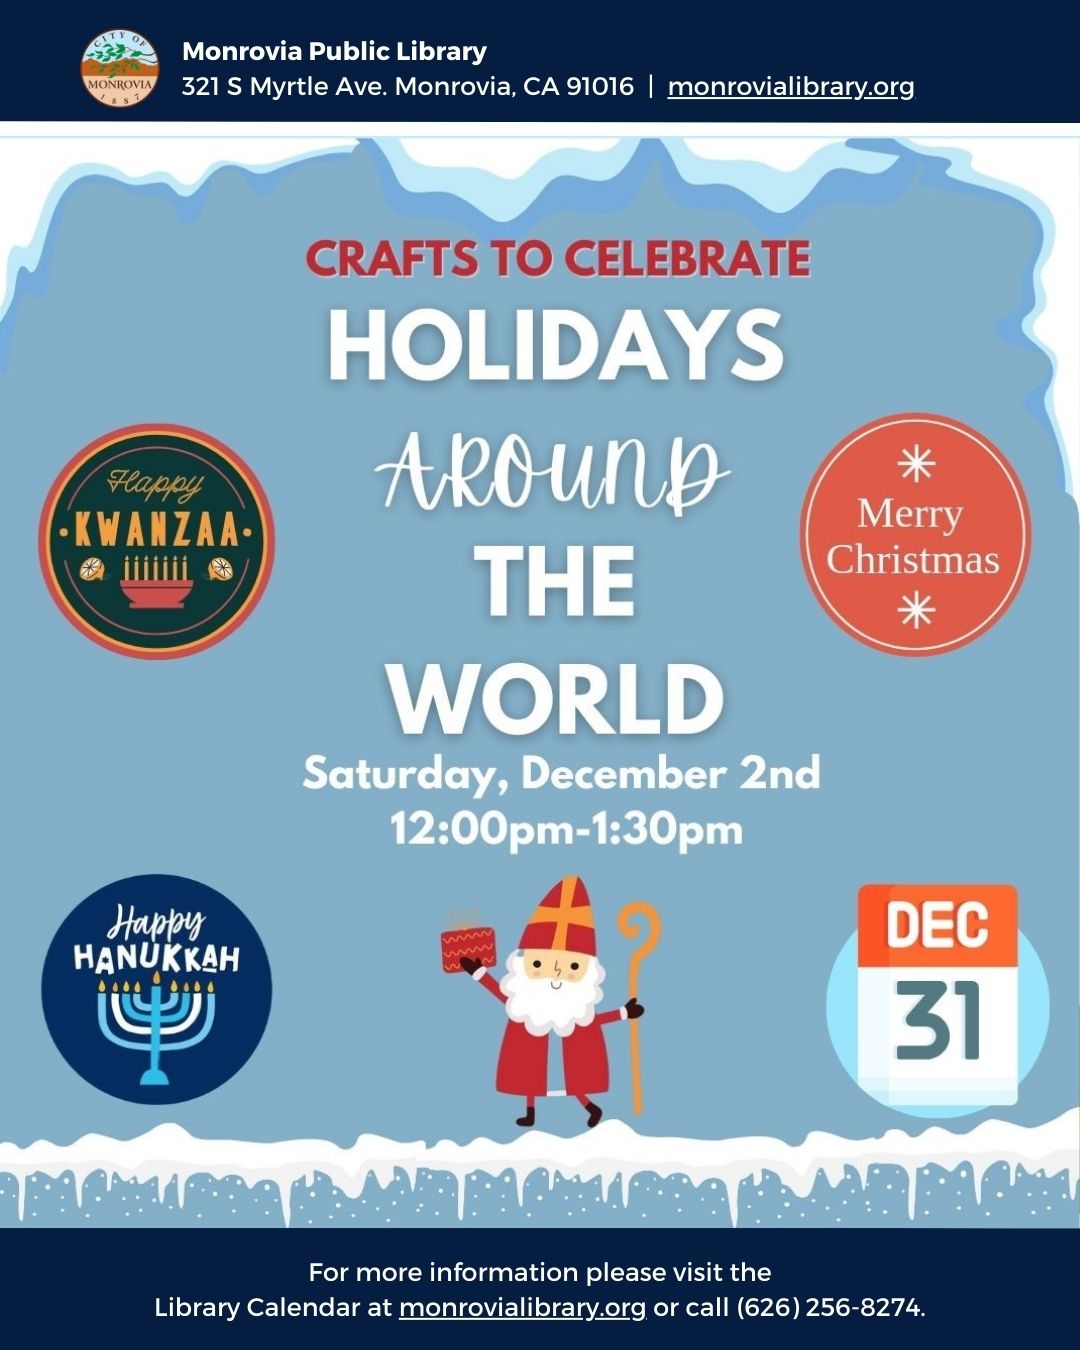 Holidays Around the World Crafts from 12pm-1:30pm